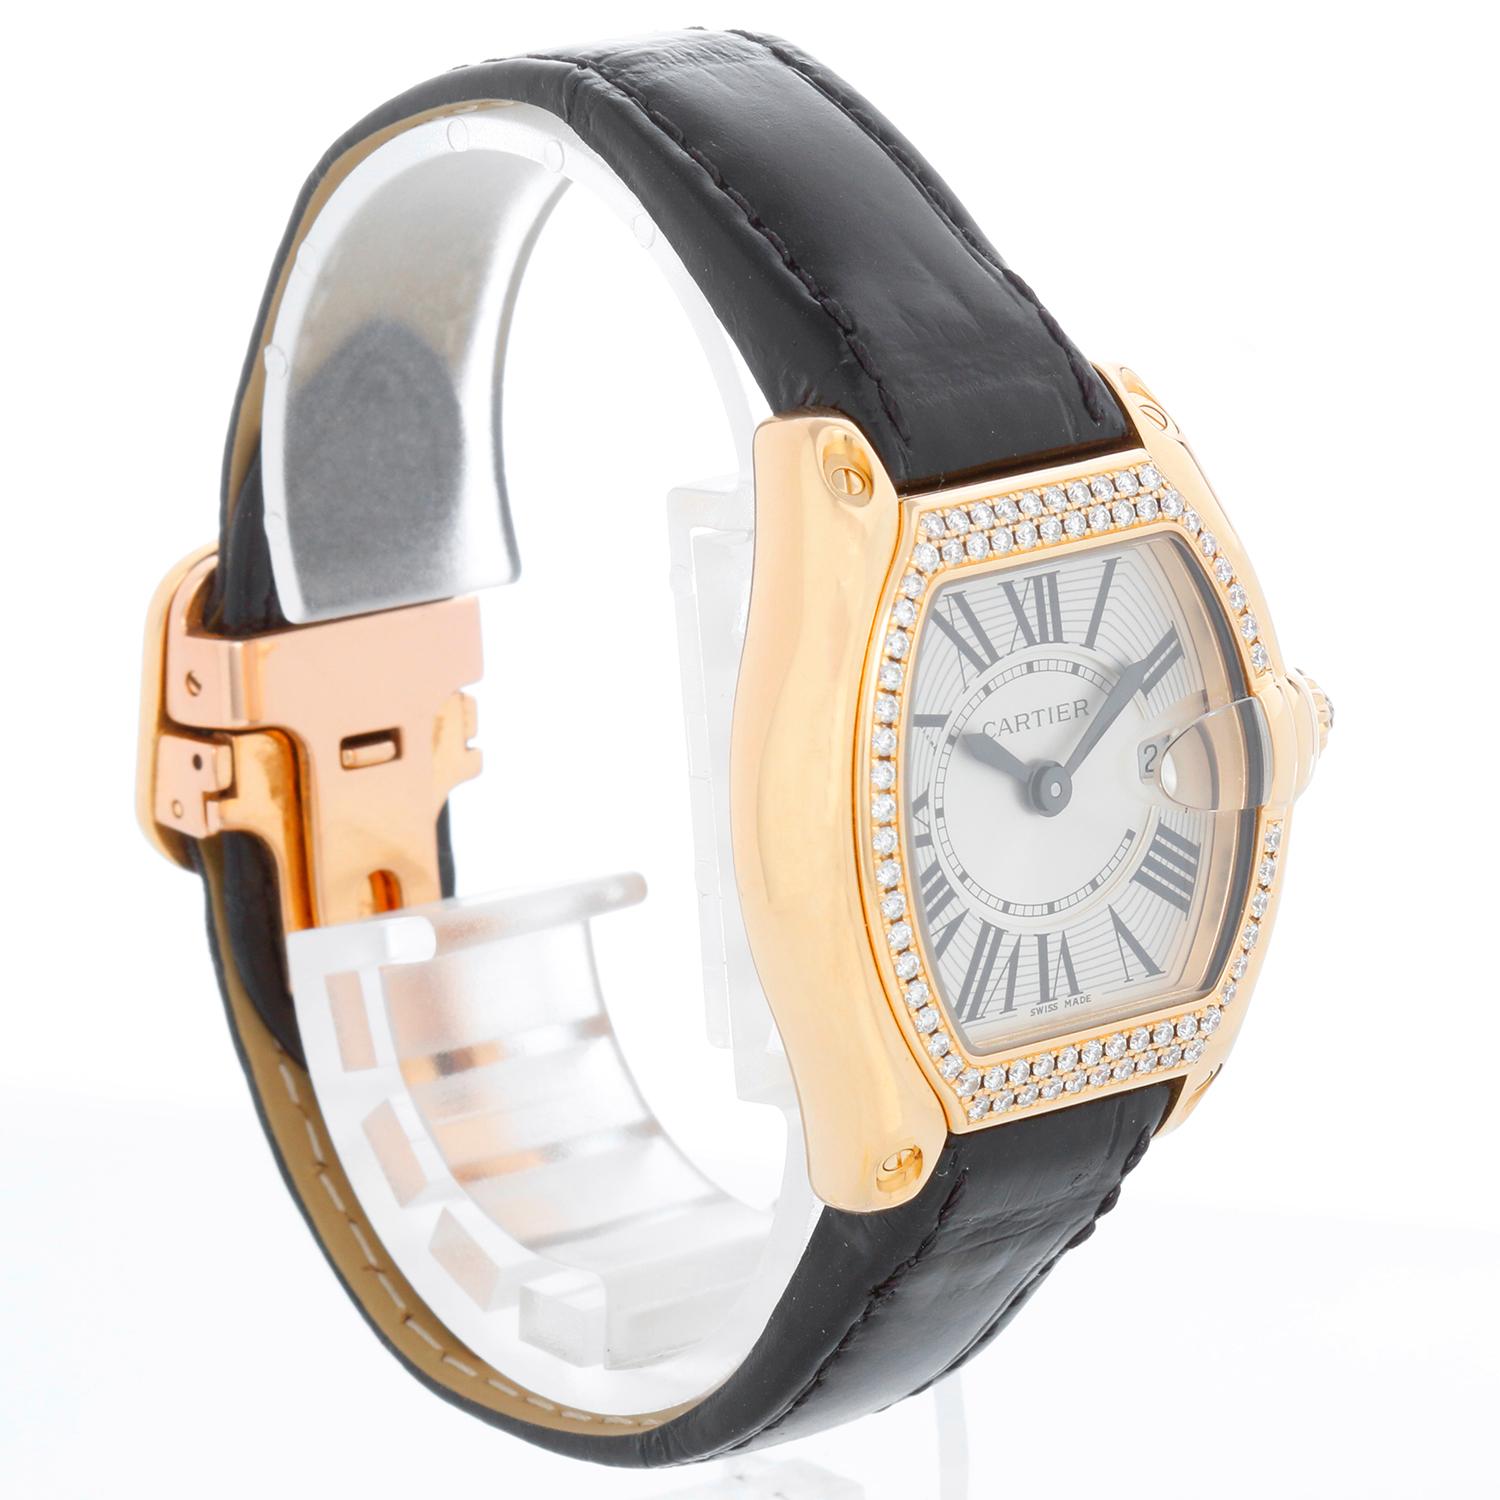 Cartier Roadster 18k Yellow Gold Quartz WE500160 2676 In Excellent Condition For Sale In Dallas, TX